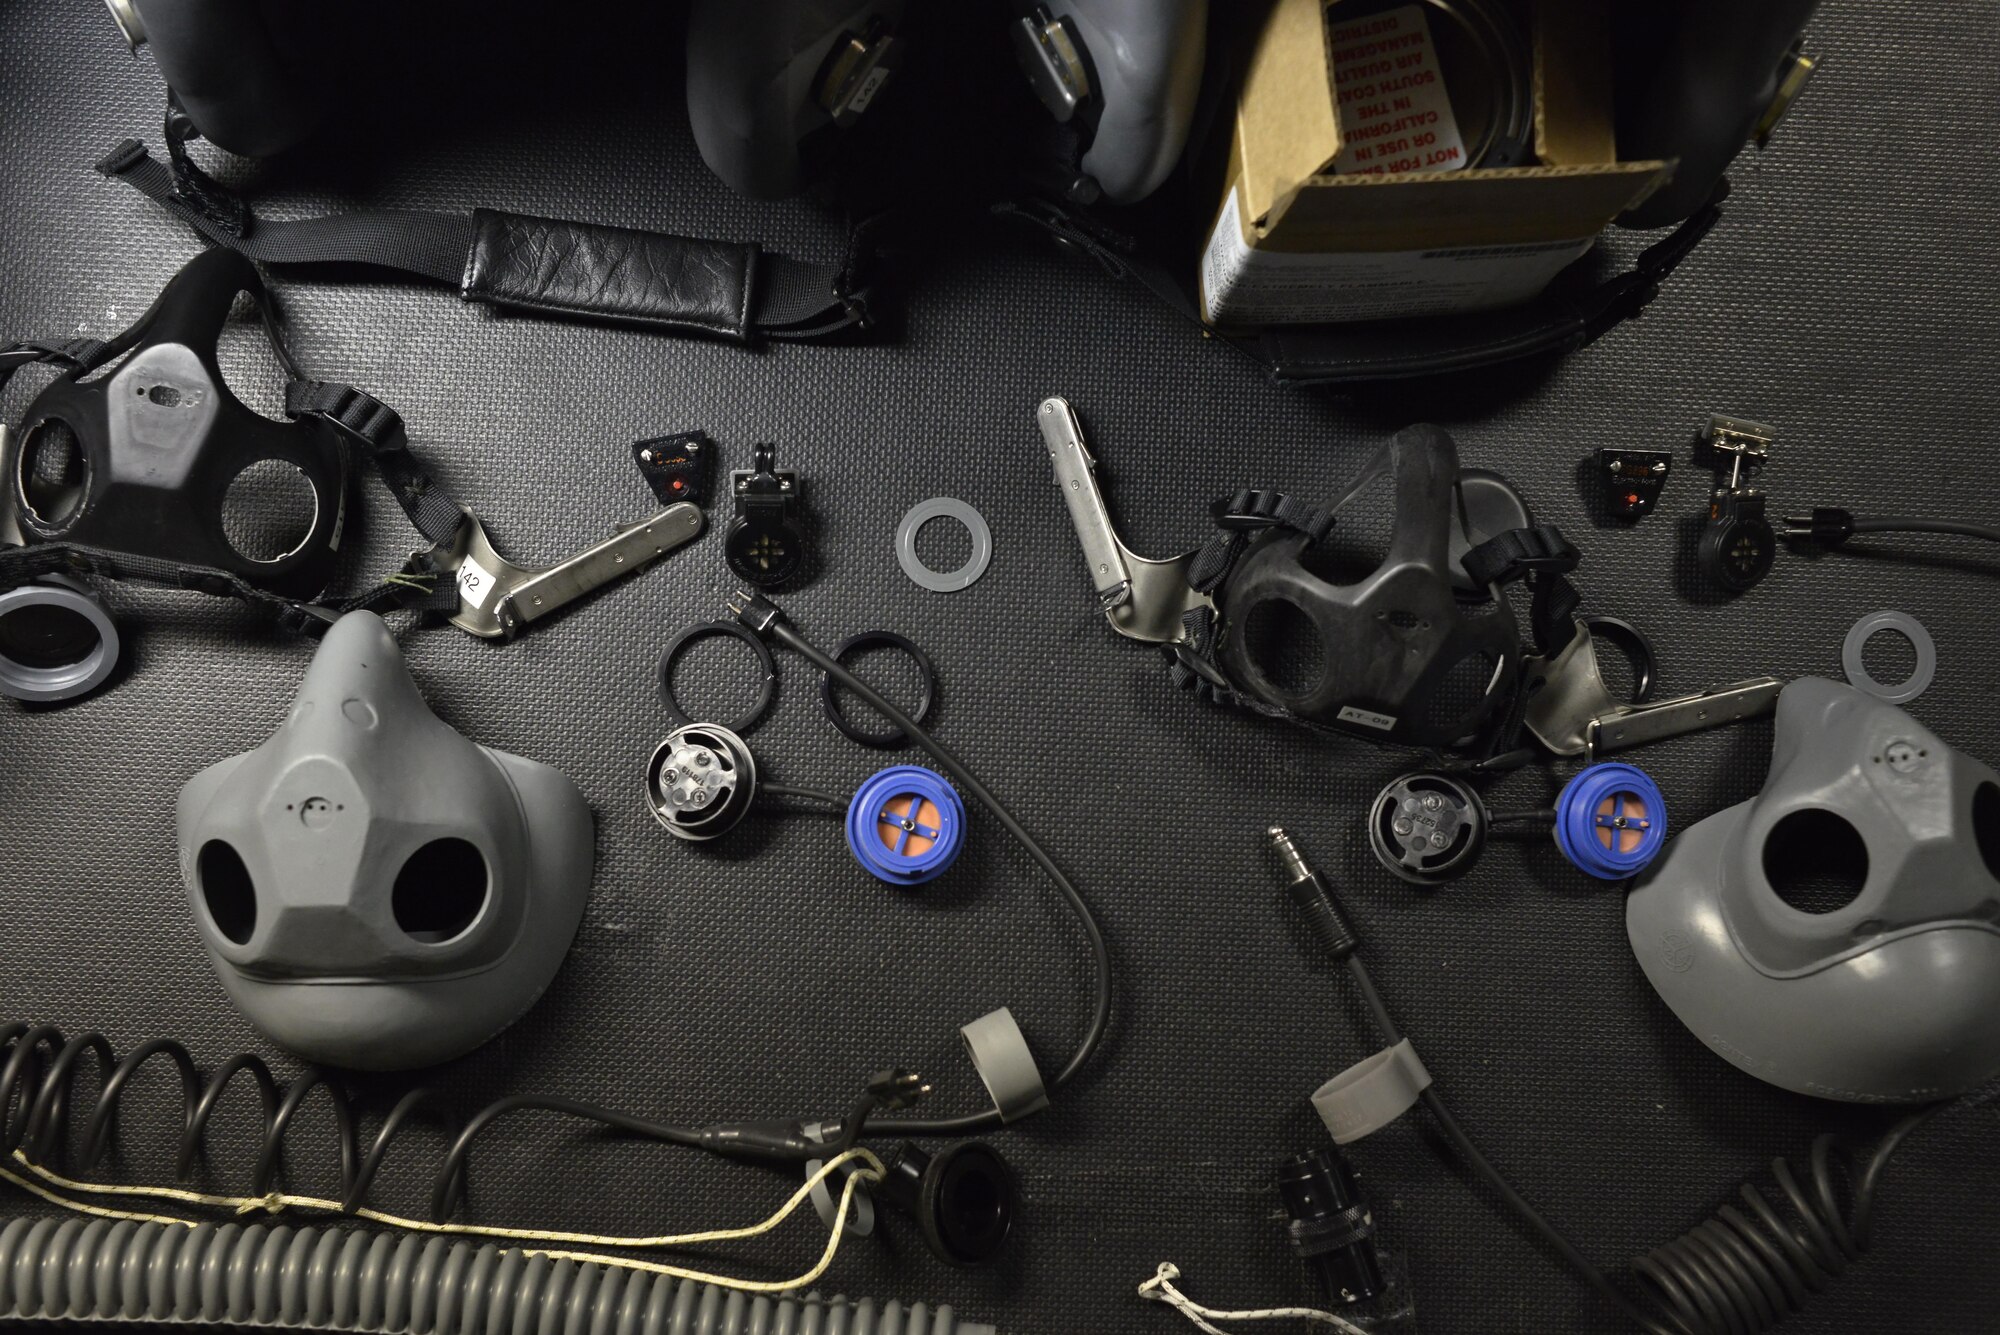 A disassembled aircrew mask waits to be inspected then re-assembled by 379th Expeditionary Operations Support Squadron Aircrew Flight Equipment airmen to proper working order for a B-1 Bomber aircrew member July 29, 2015 at Al Udeid Air Base, Qatar. B-1 Bomber aircrews rely on AFE airmen’s proficiency to ensure proper function of helmets, life preservers, communication modules and other types of equipment used during flight or in case of an emergency. (U.S. Air Force photo/Staff Sgt. Alexandre Montes)